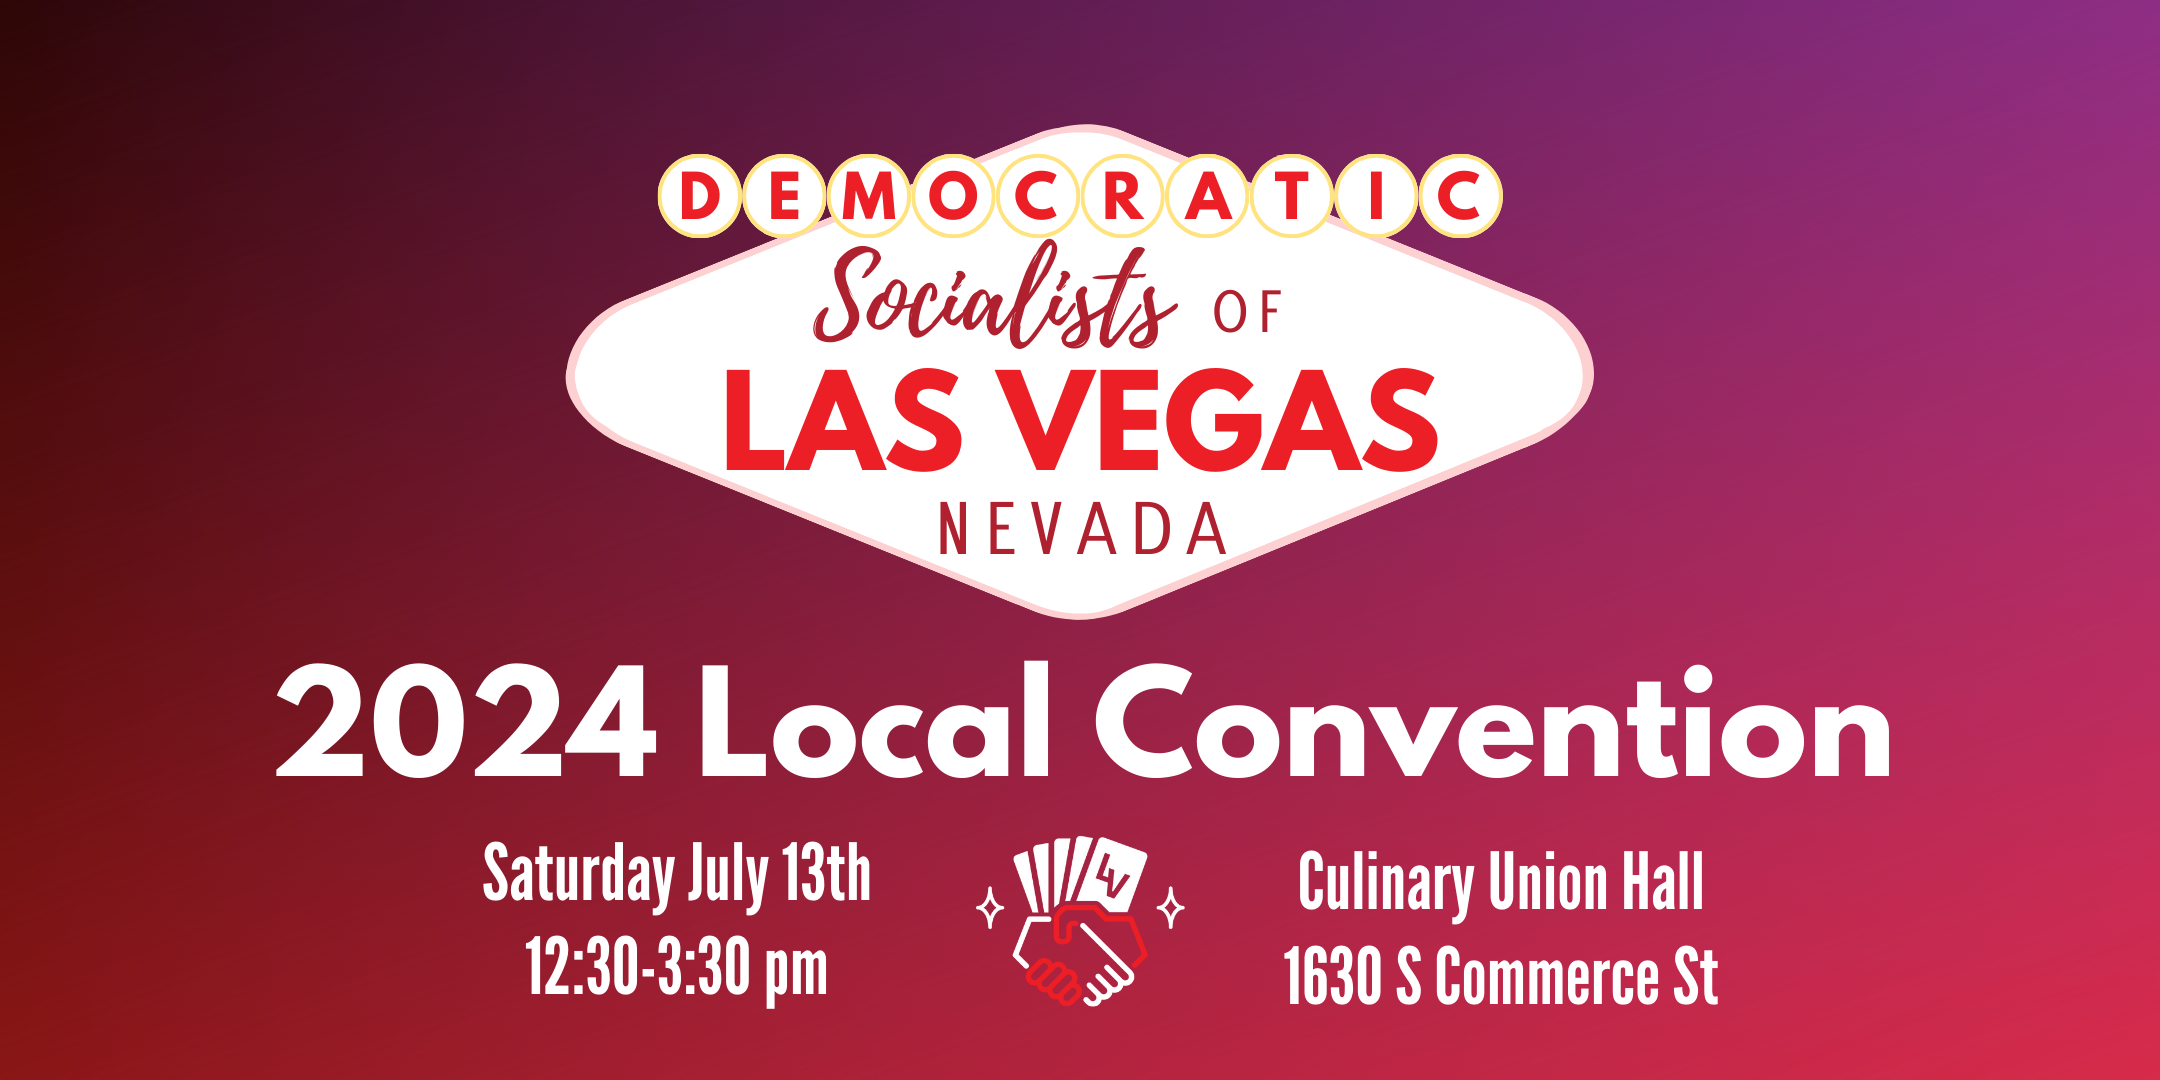 Image that is similar to the "Welcome to Fabulous Las Vegas" sign which reads "Democratic Socialists of Las Vegas Nevada" with text below it that reads "2024 Location Convention", "Saturday July 13th 12:30 to 3:30 pm", "Culinary Union Hall 1630 South Commerce Street"